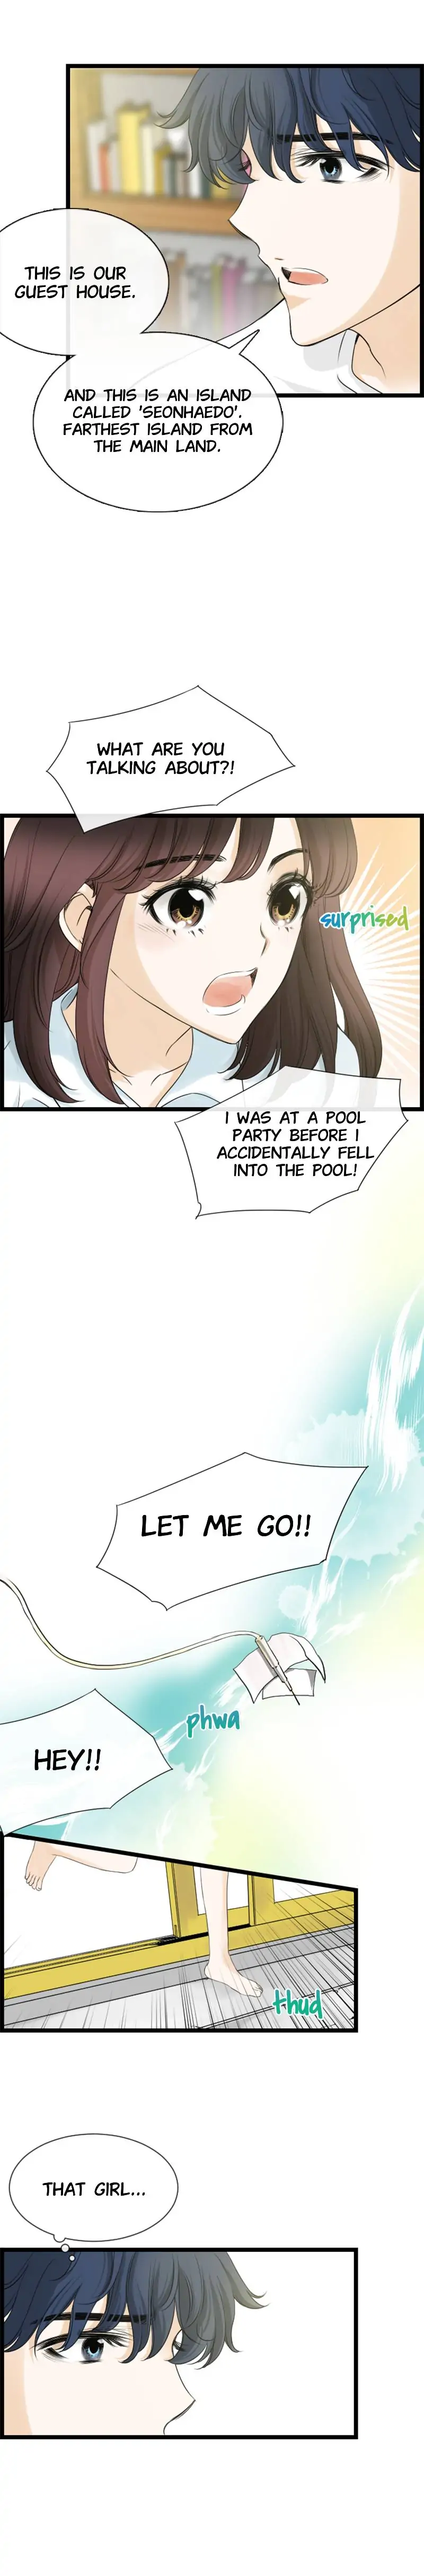 Pool in Love chapter 2